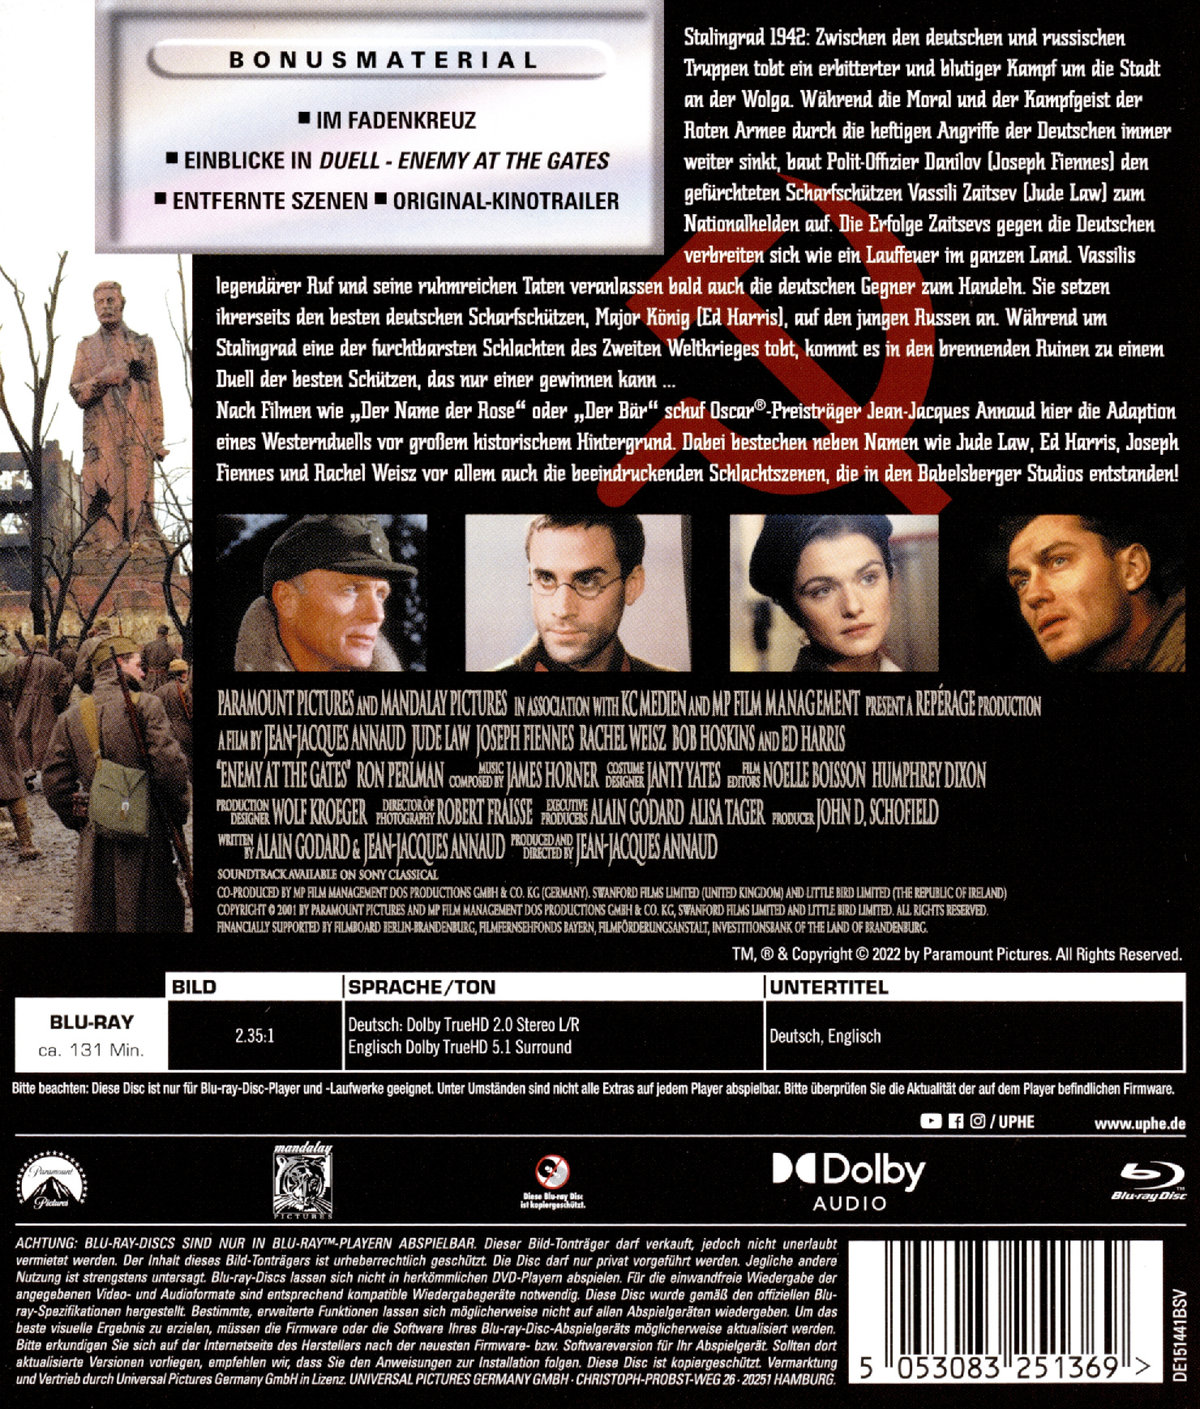 Duell - Enemy at the Gates (blu-ray)